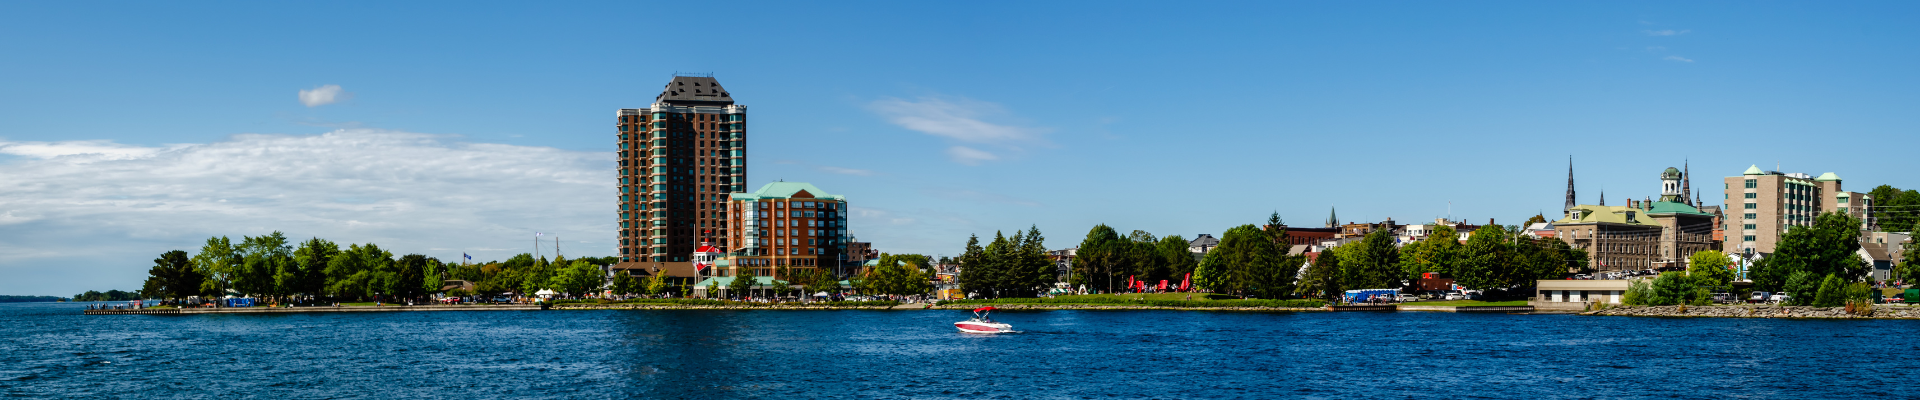 Brockville as seen from the Saint Lawrence River on the east side of the downtown